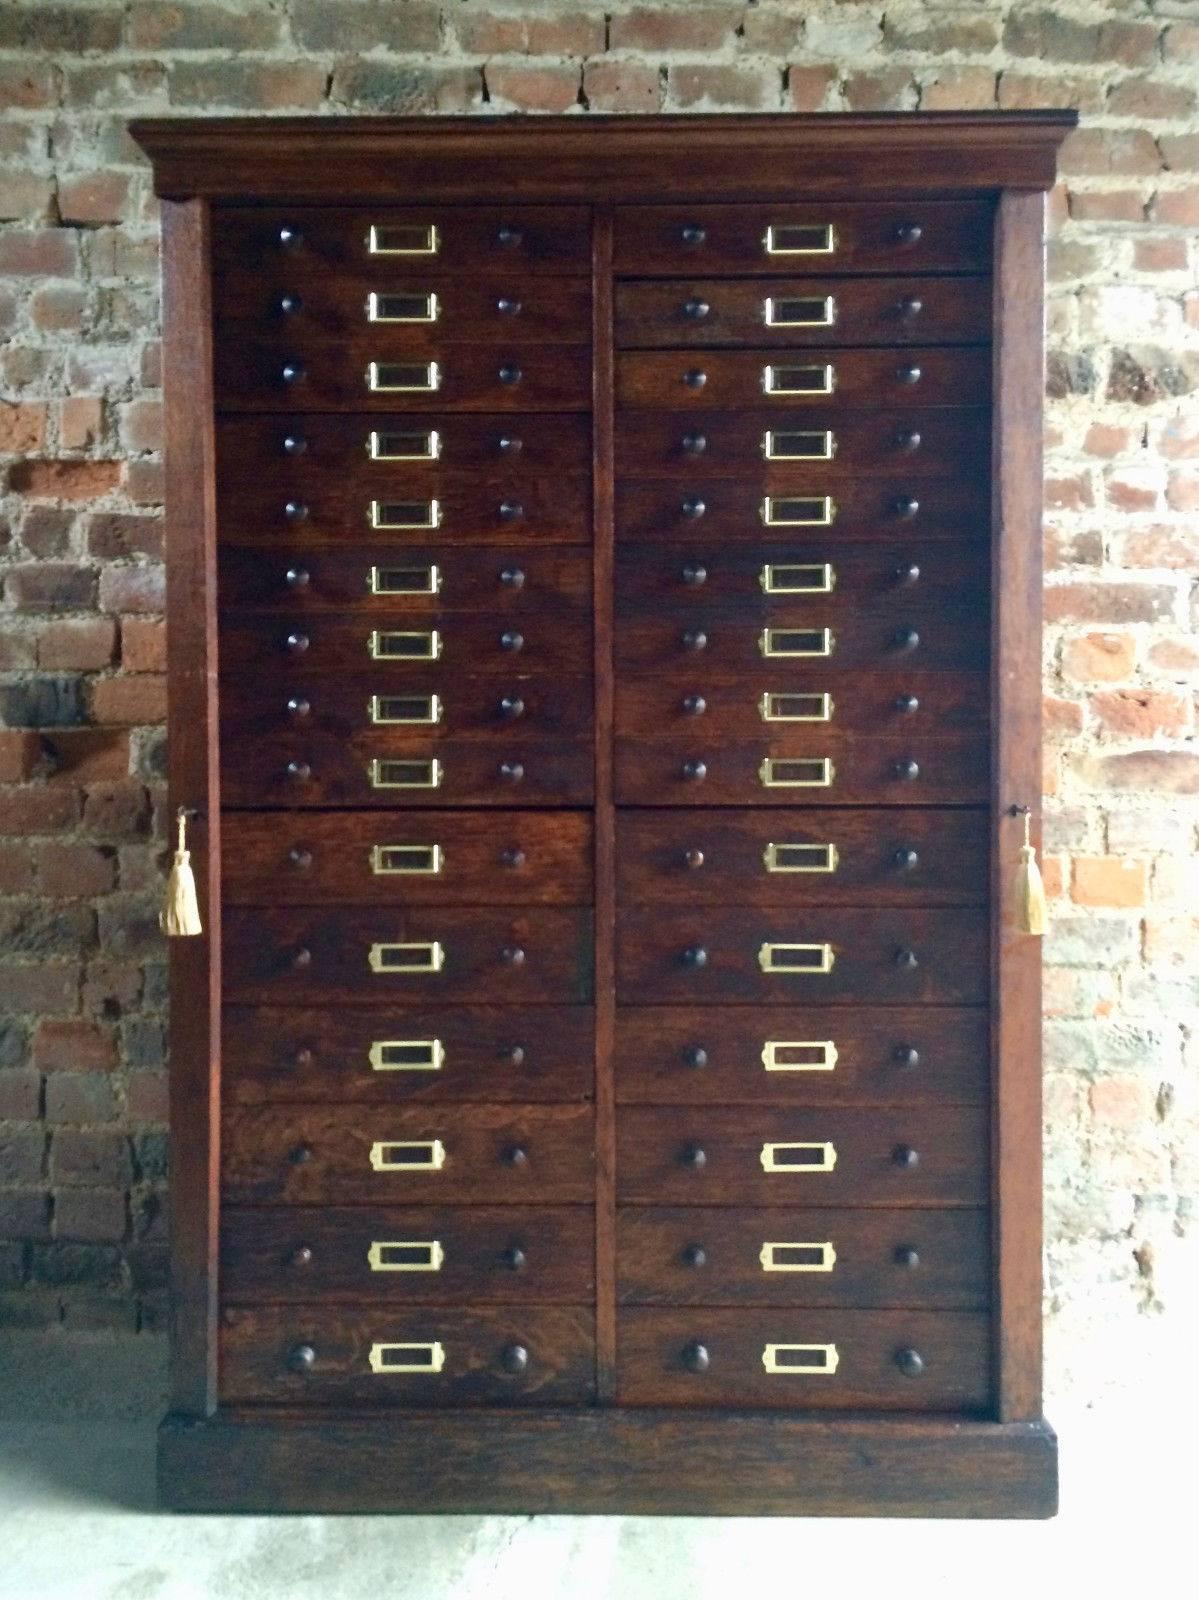 Magnificent late 19th century Oak Museum shop cabinet, circa 1890, the cabinet featuring a series of sixteen small pull out drawers and seven double depth pull out drawers, each drawer with index card holder and turned knob drawer pulls, with two